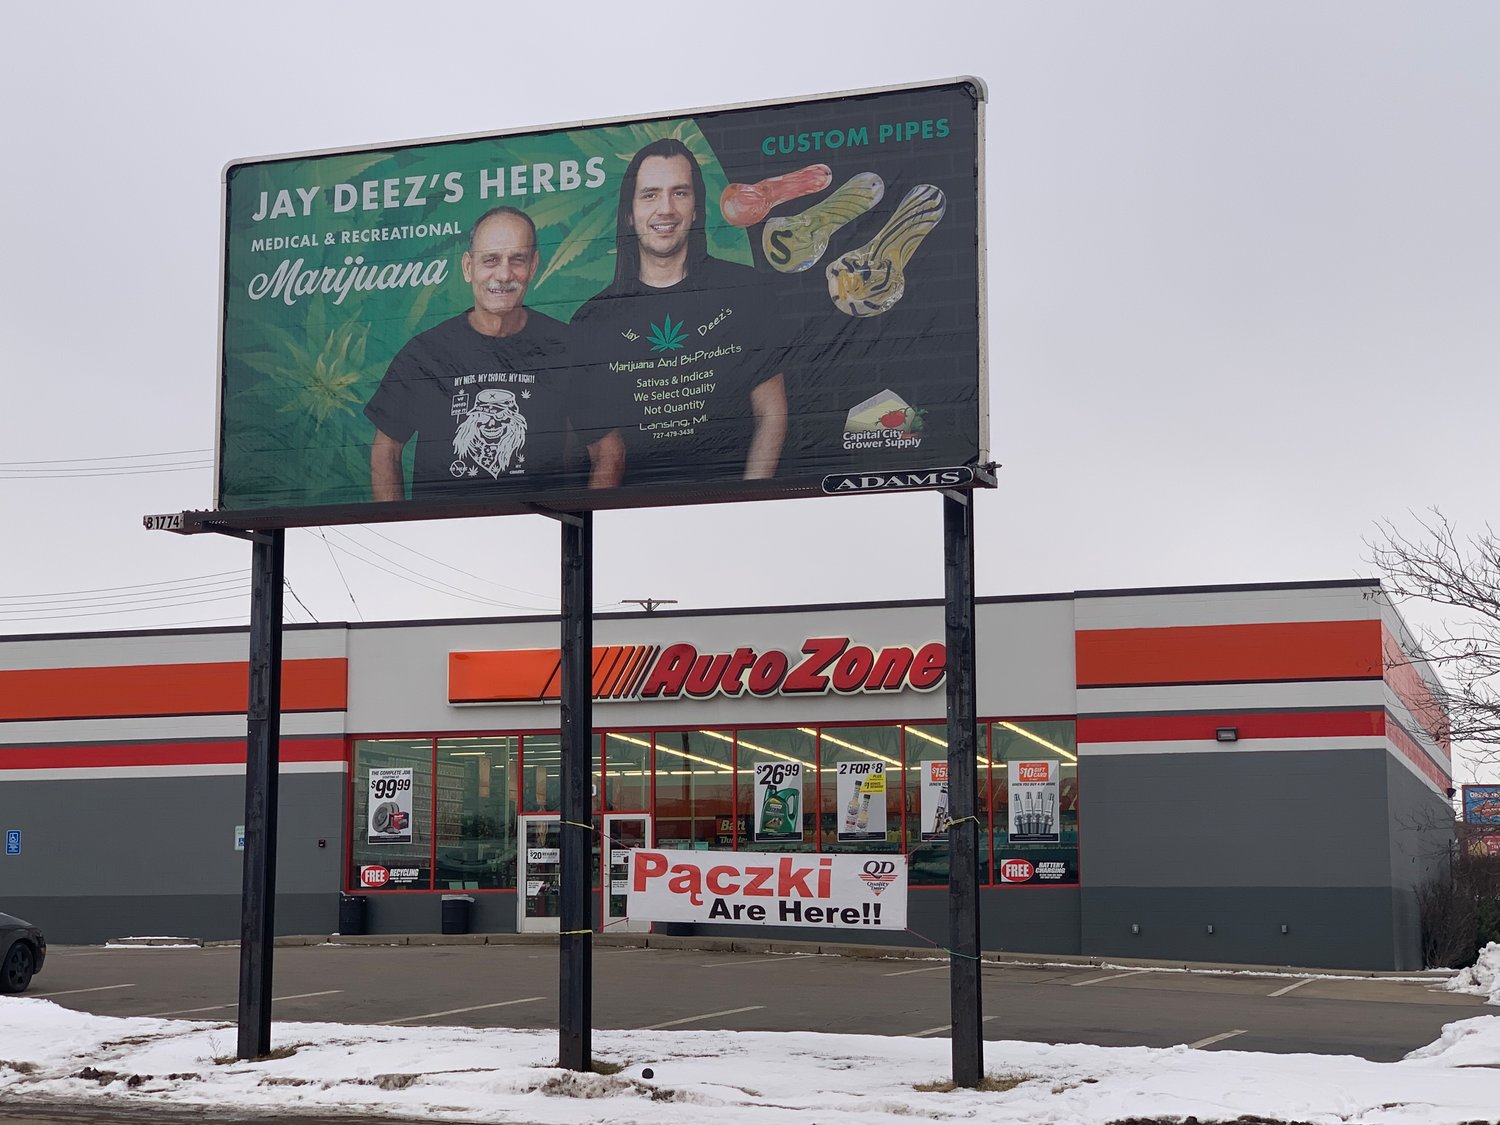 Although this billboards might suggest otherwise, Jay Deez's Herbs isn't licensed to sell recreational marijuana in the city of Lansing.